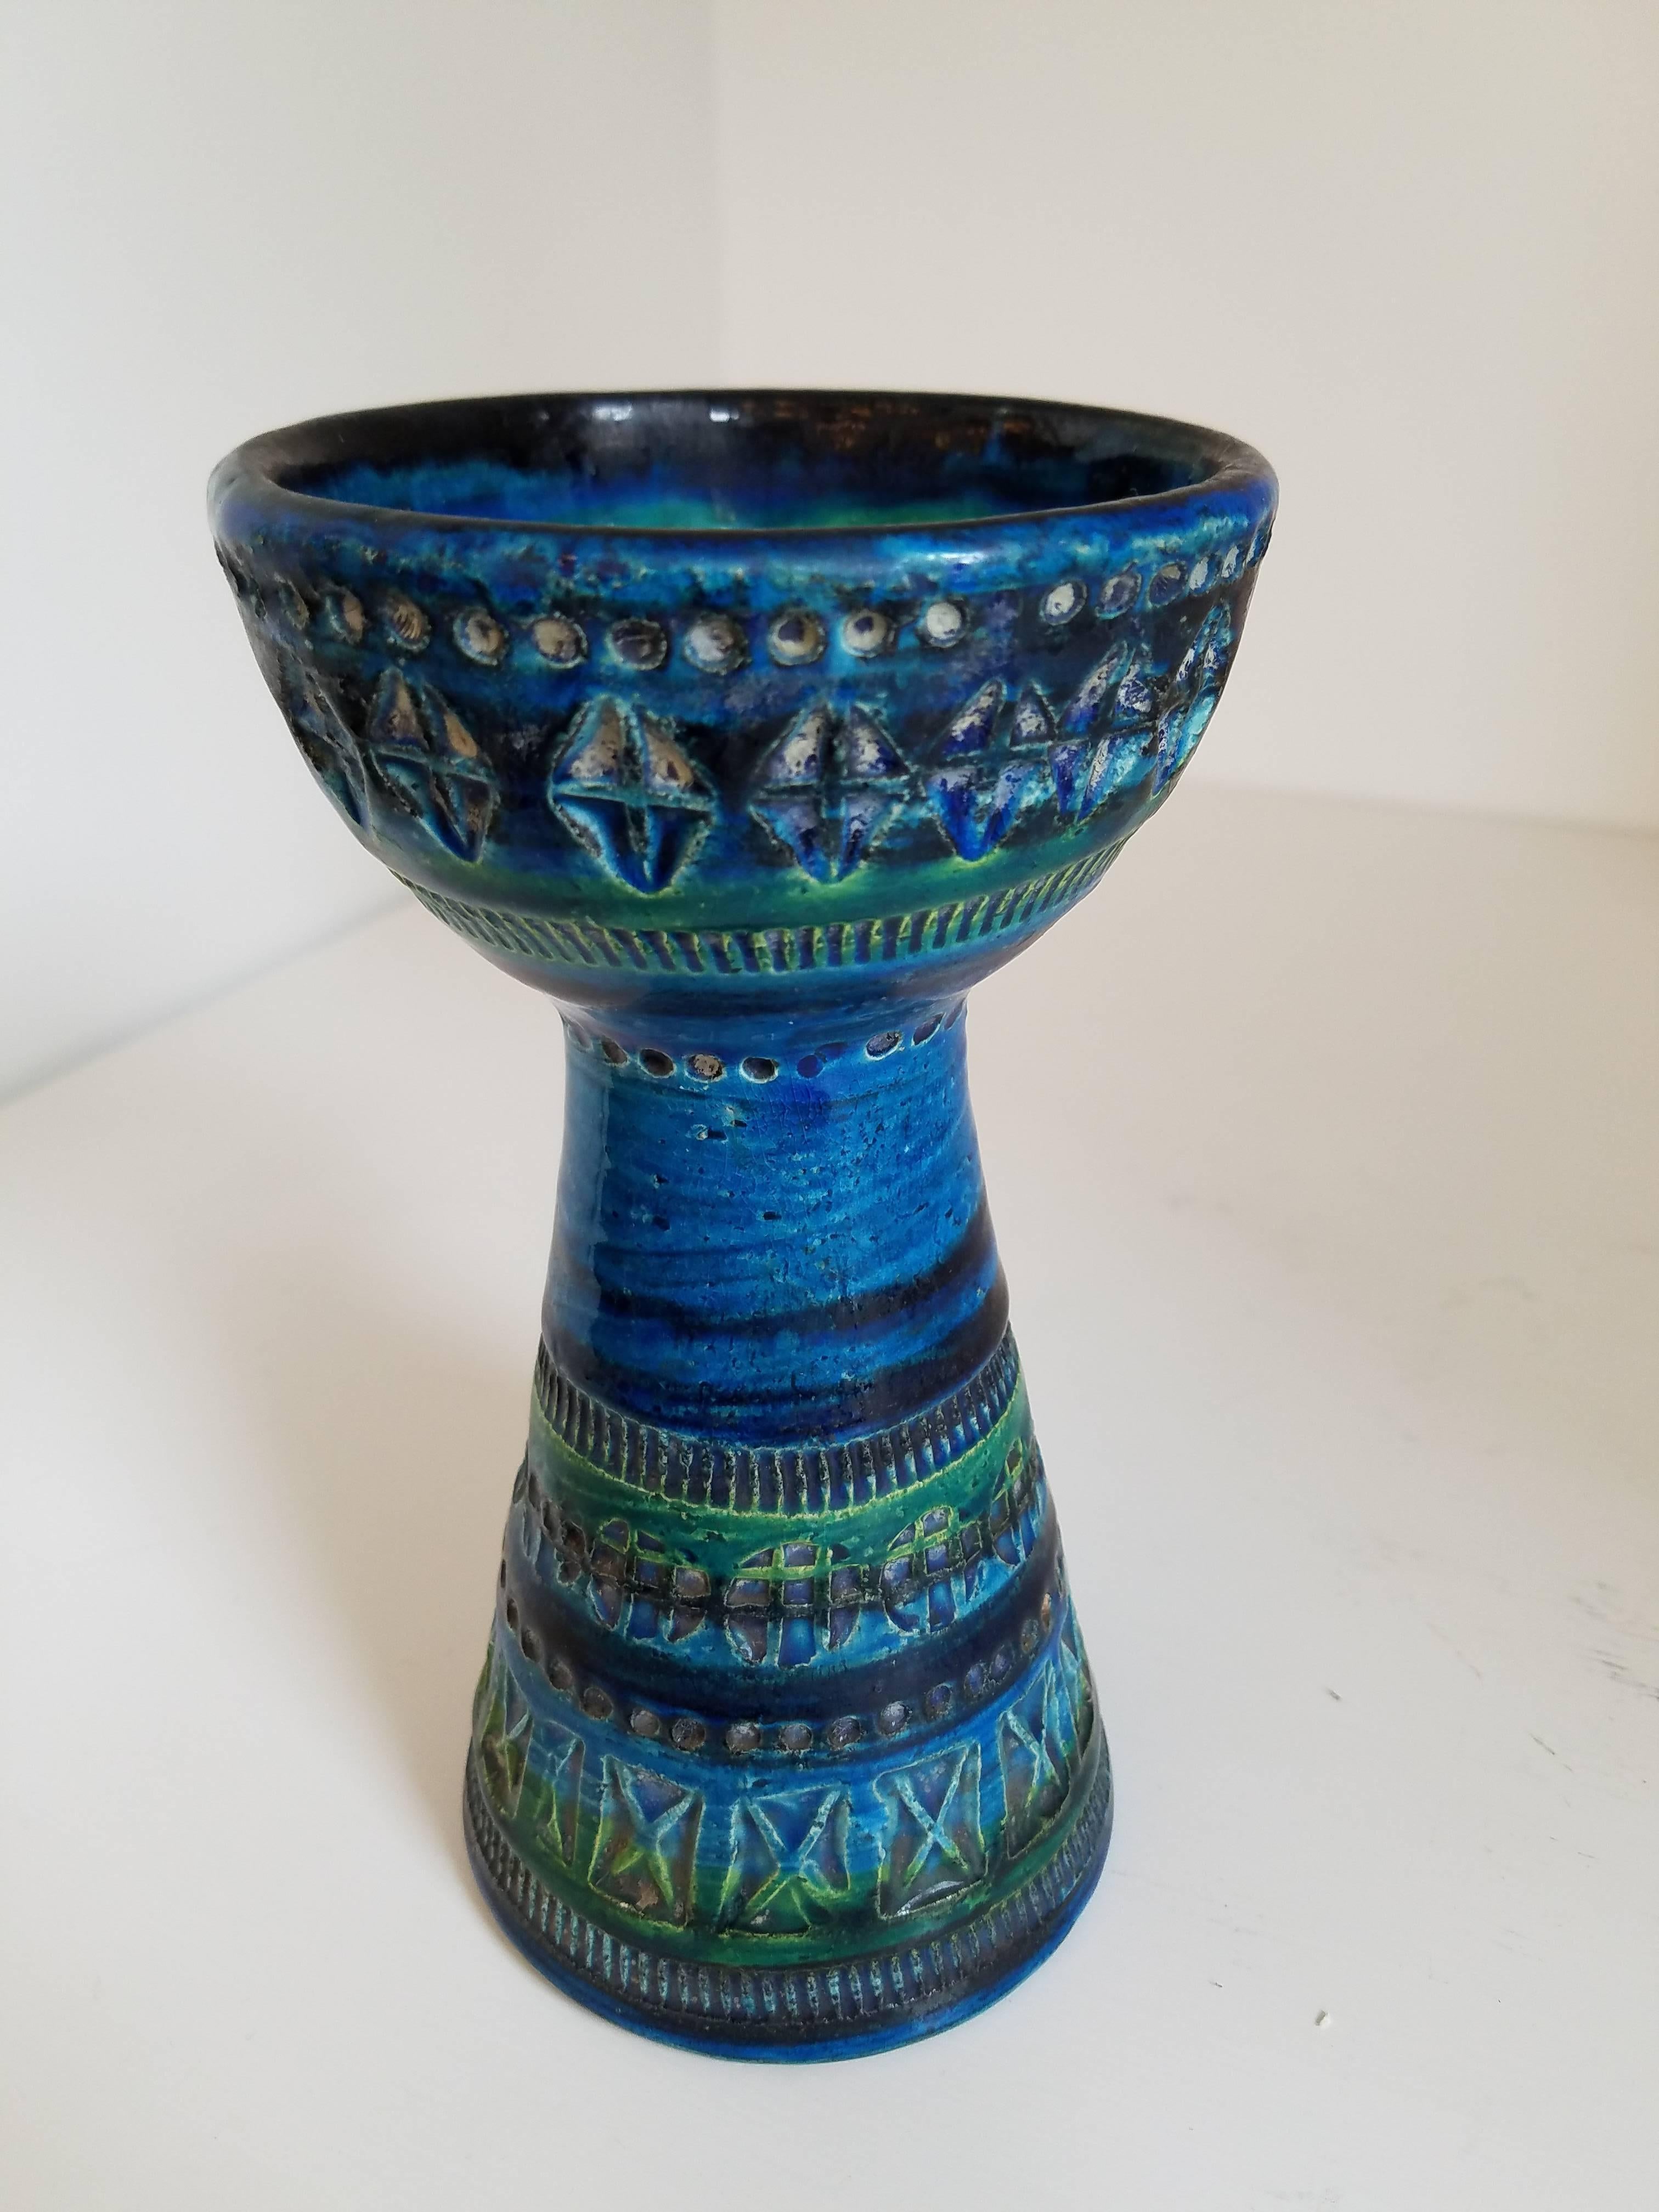 Rimini blue, blue glazed ceramic candleholder (column or taper) by Aldo Londi for Bitossi with hand carved geometric designs and a vibrant turquoise and cobalt glaze. Made in Italy, circa 1960.